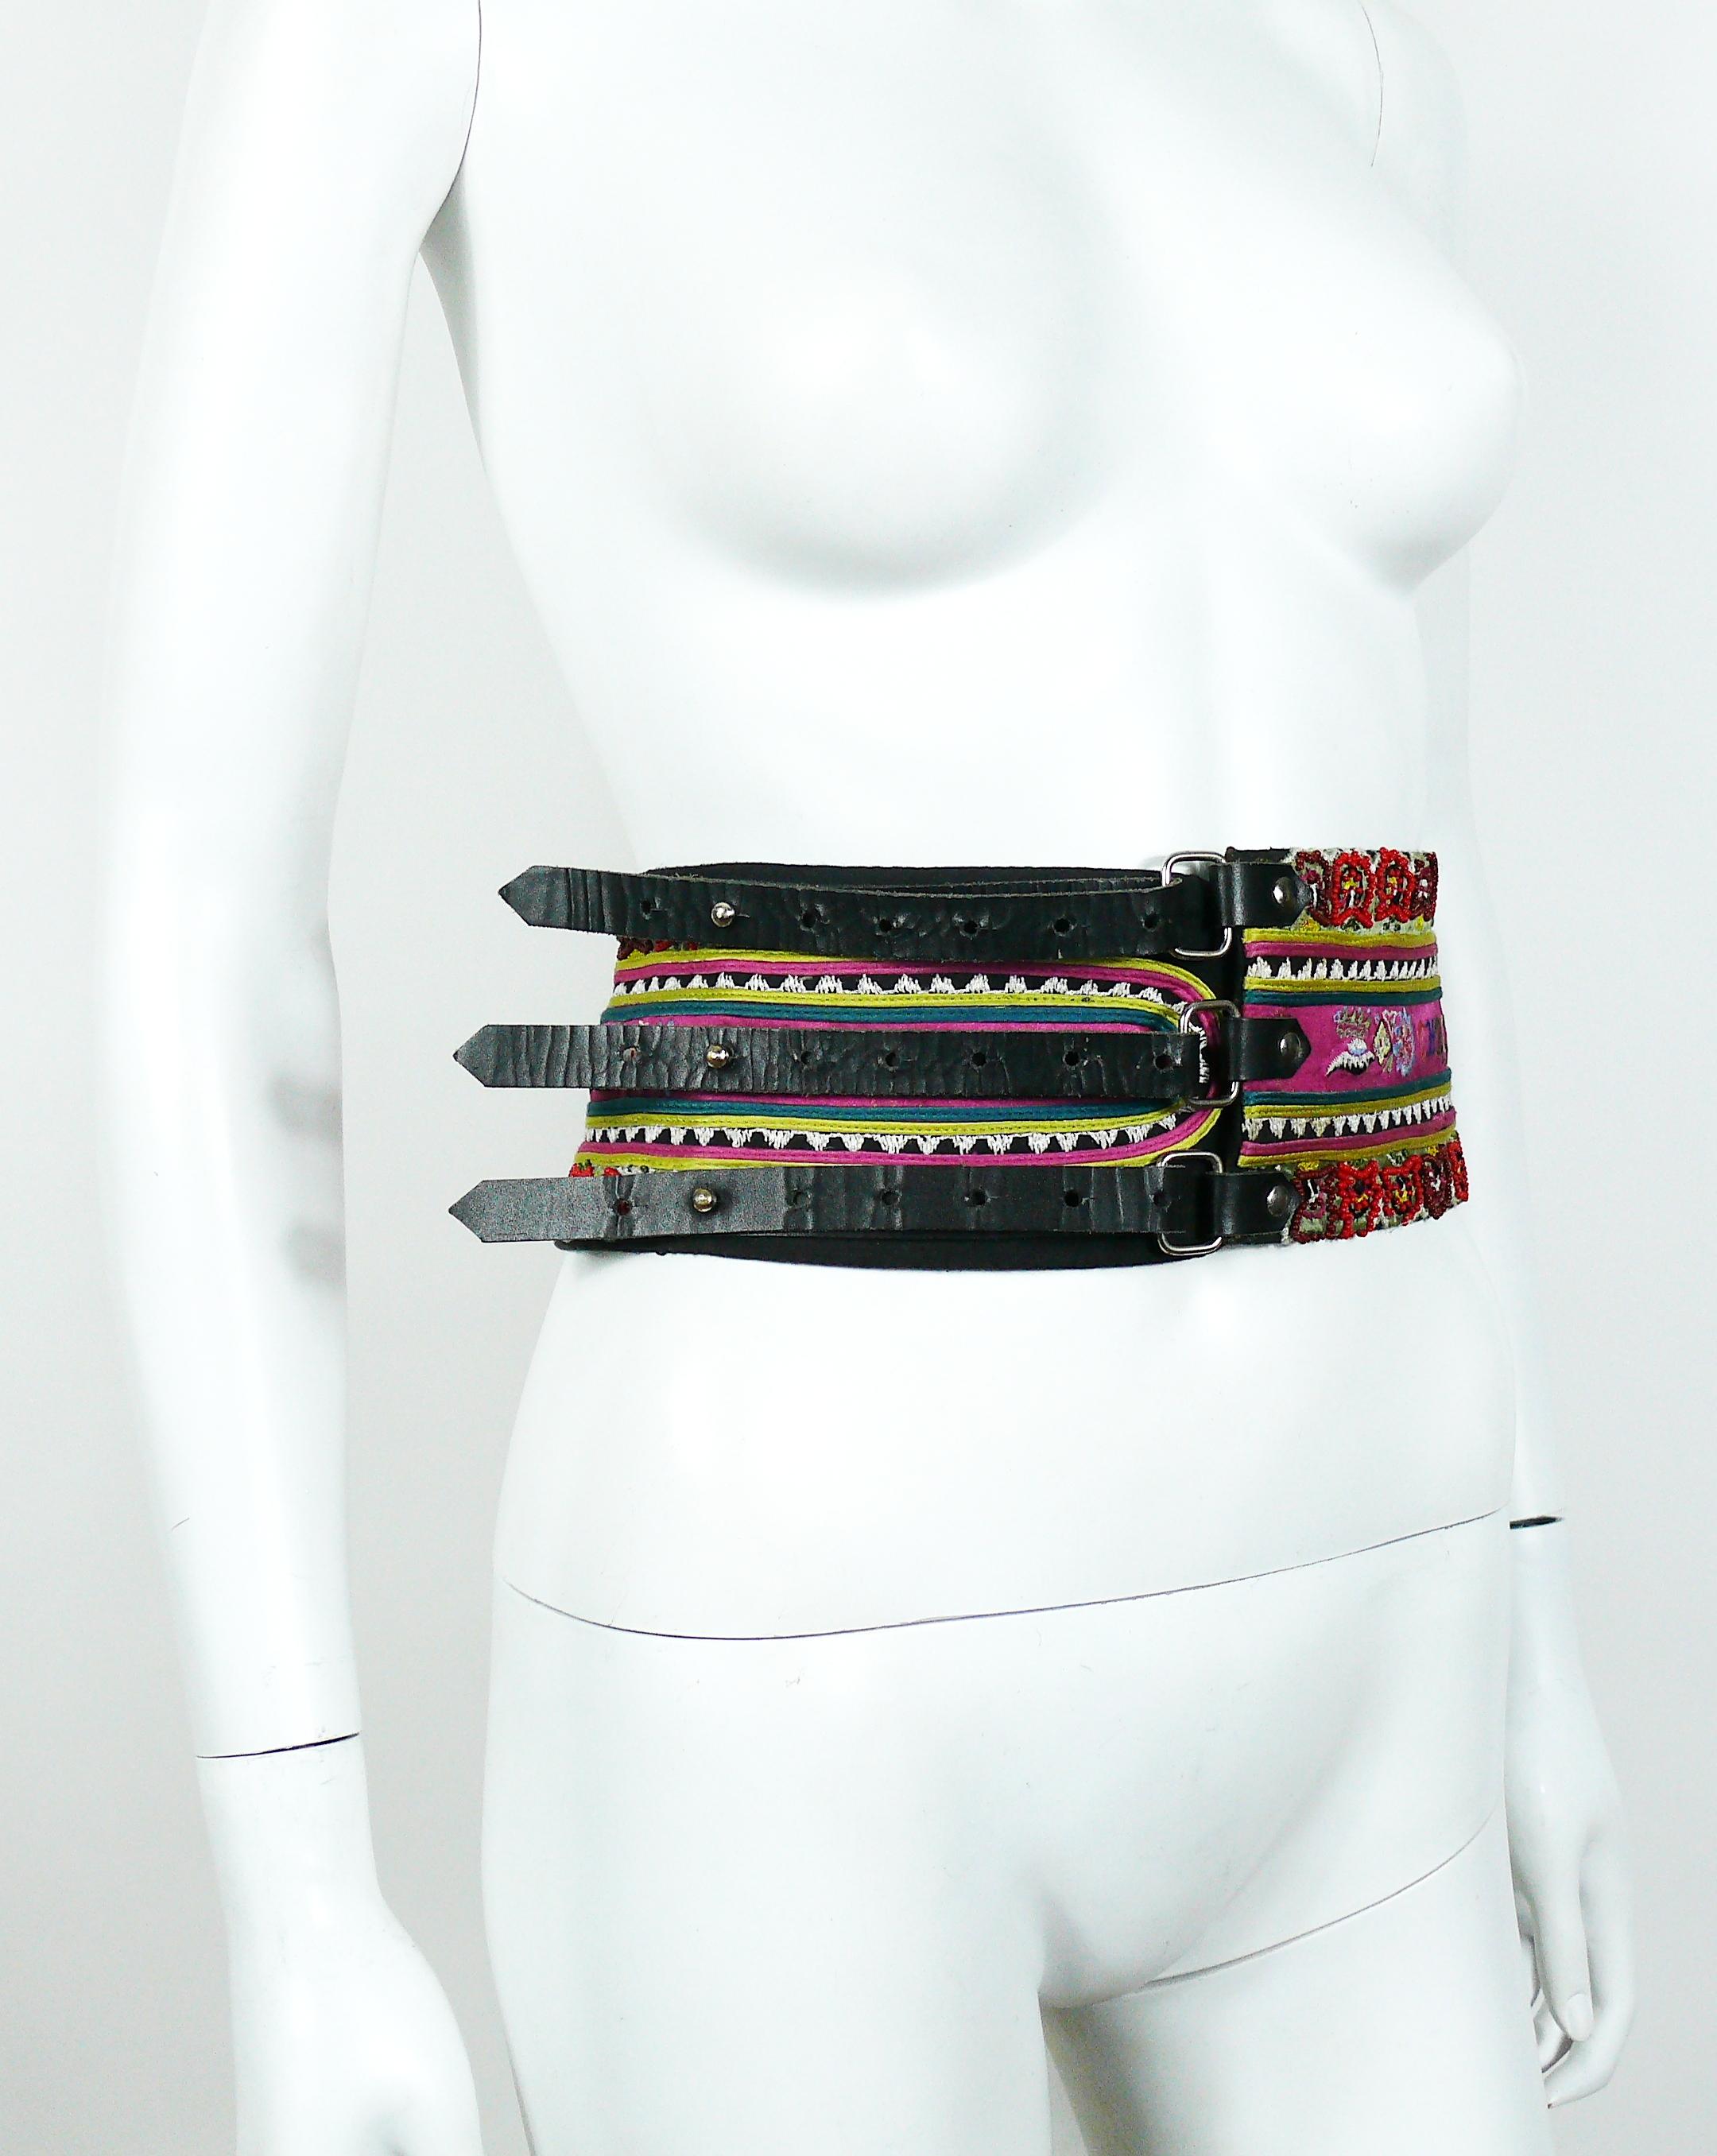 Christian Lacroix vintage ethnic inspired wide high waist textile belt featuring multicolored Indian embroideries and pearls.

This belt fastens with three black leather straps and rivet type snap/pop buttons.
Silver toned hardware.

Marked